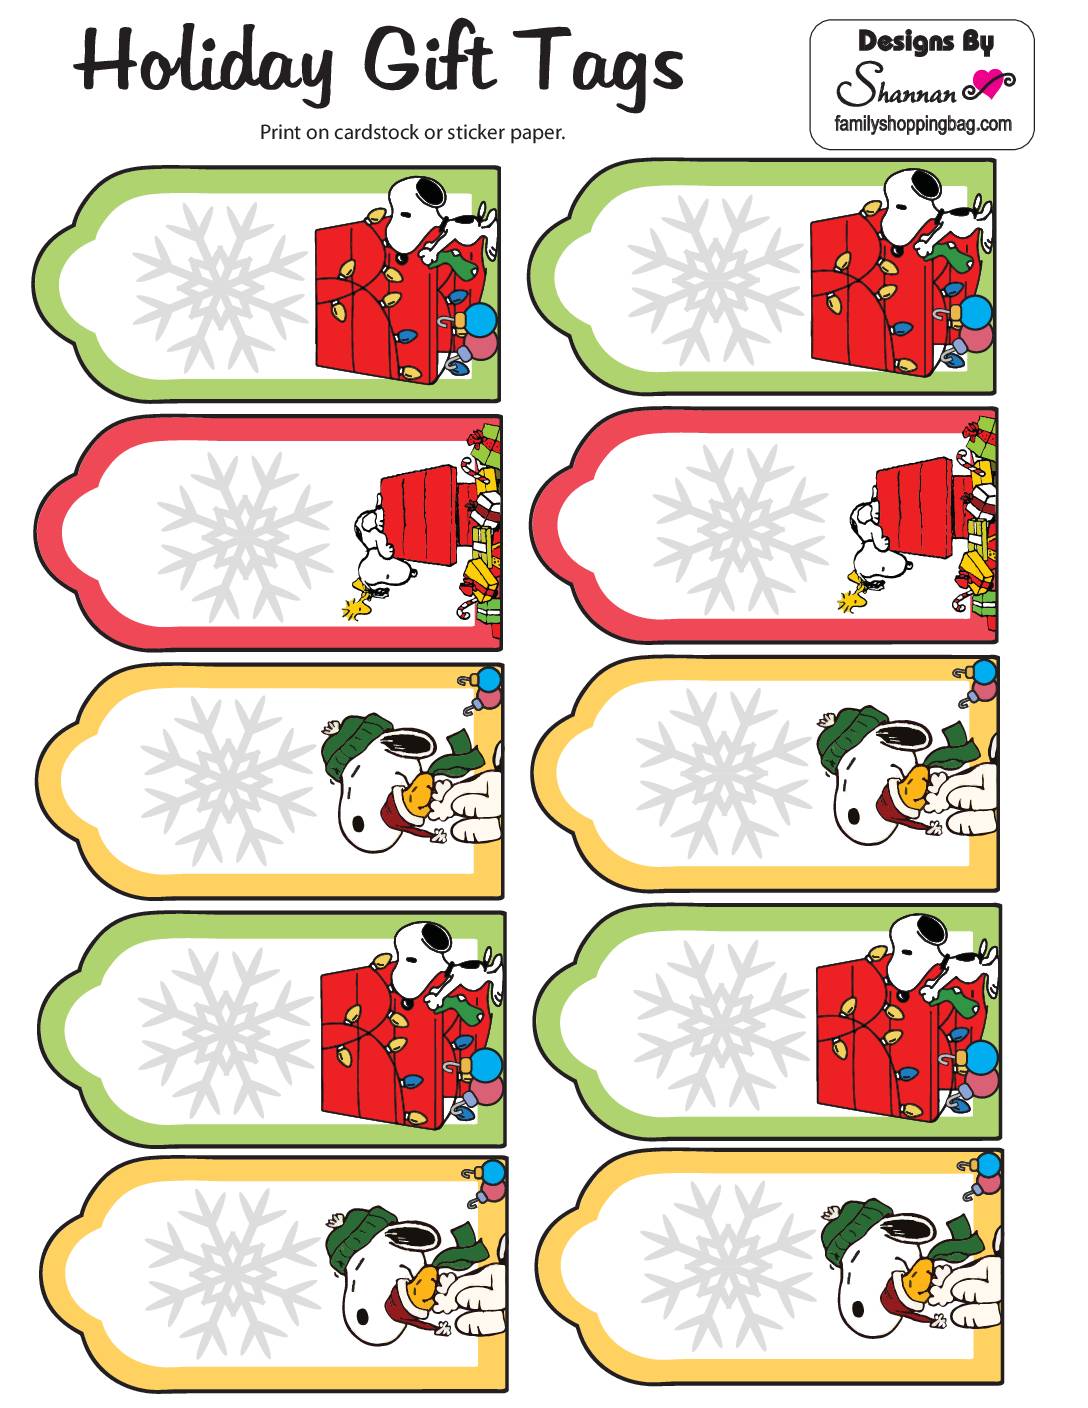 Peanuts, Snoopy & Woodstock Warm Wishes Gift Tags